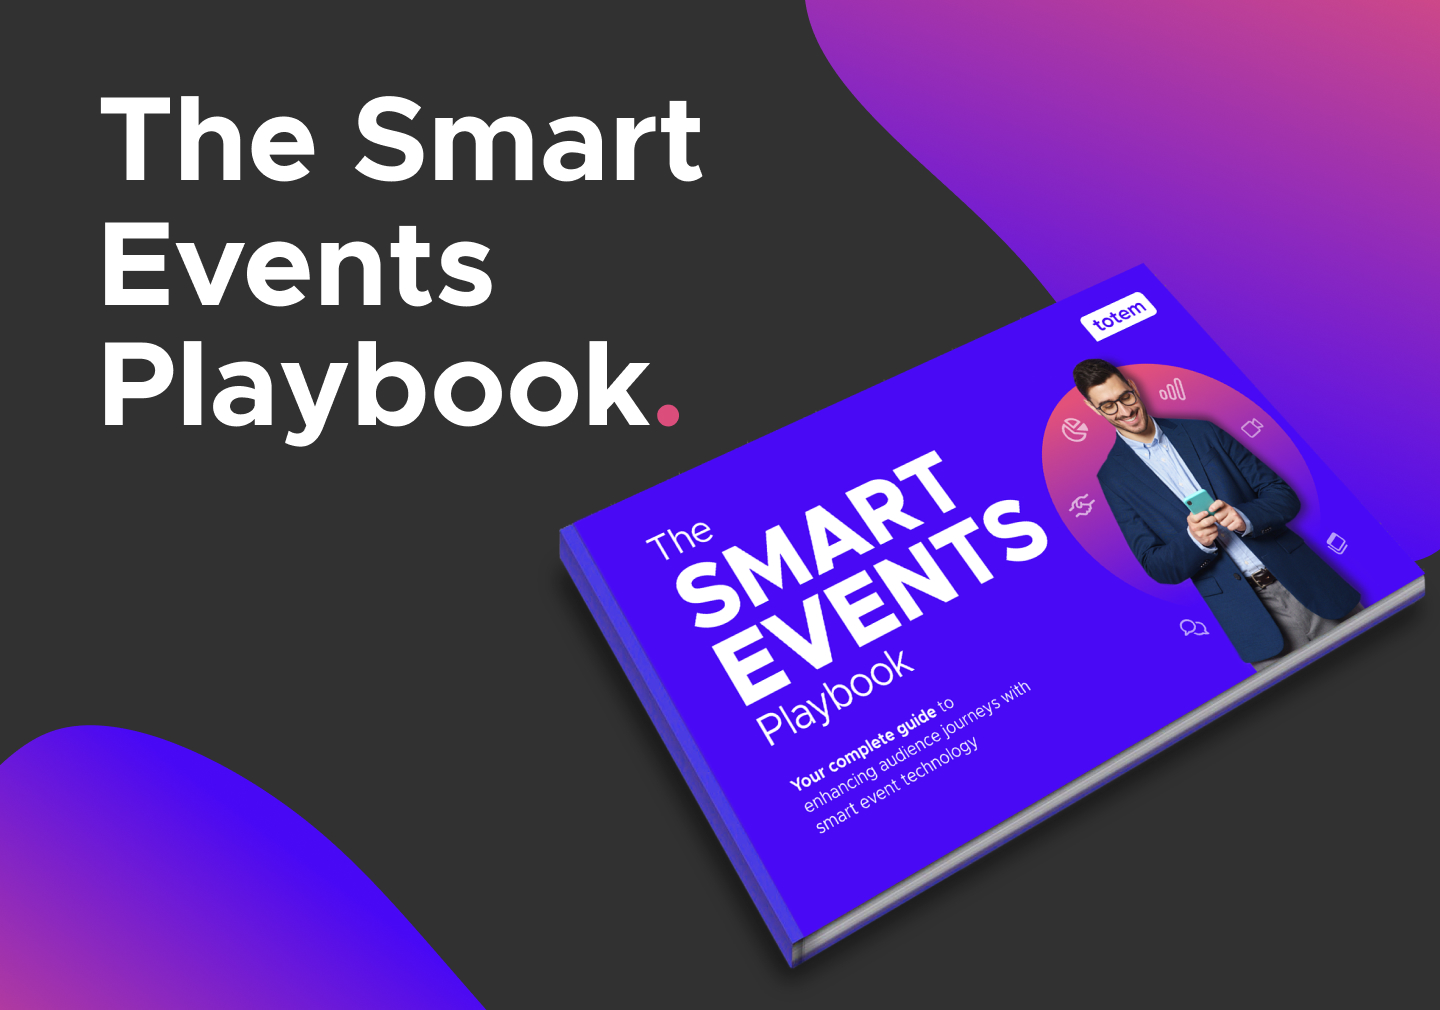 A thumbnail showing the smart events playbook